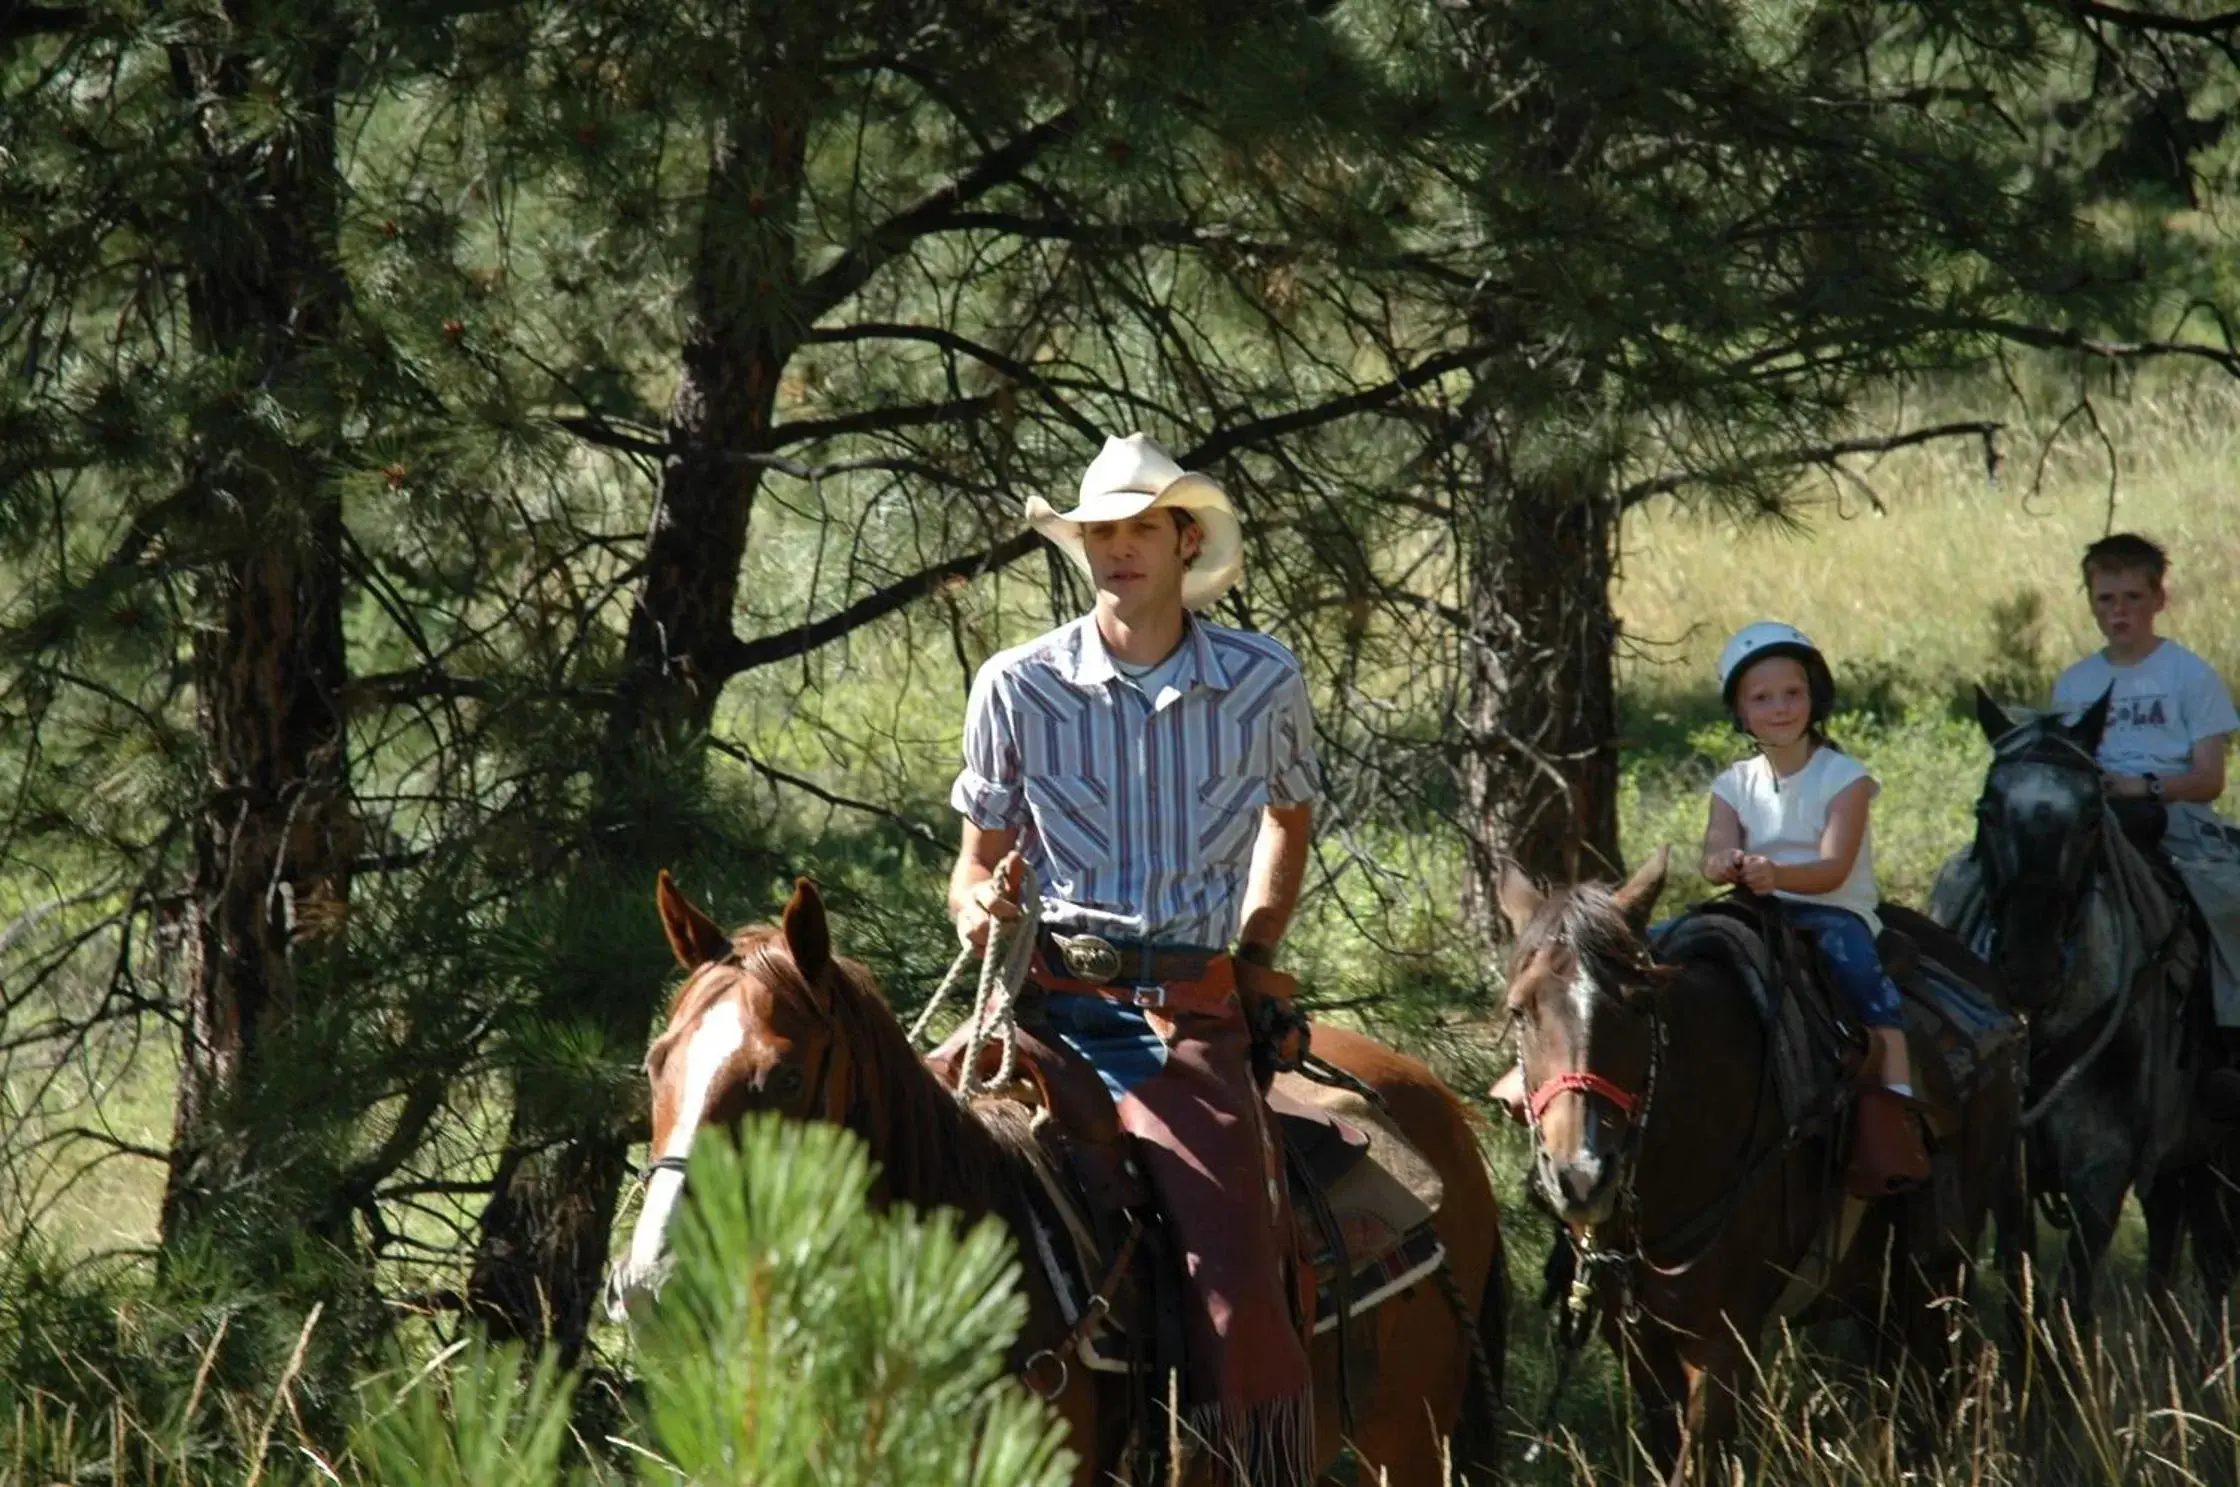 Horse-riding in Lonesome Dove Ranch